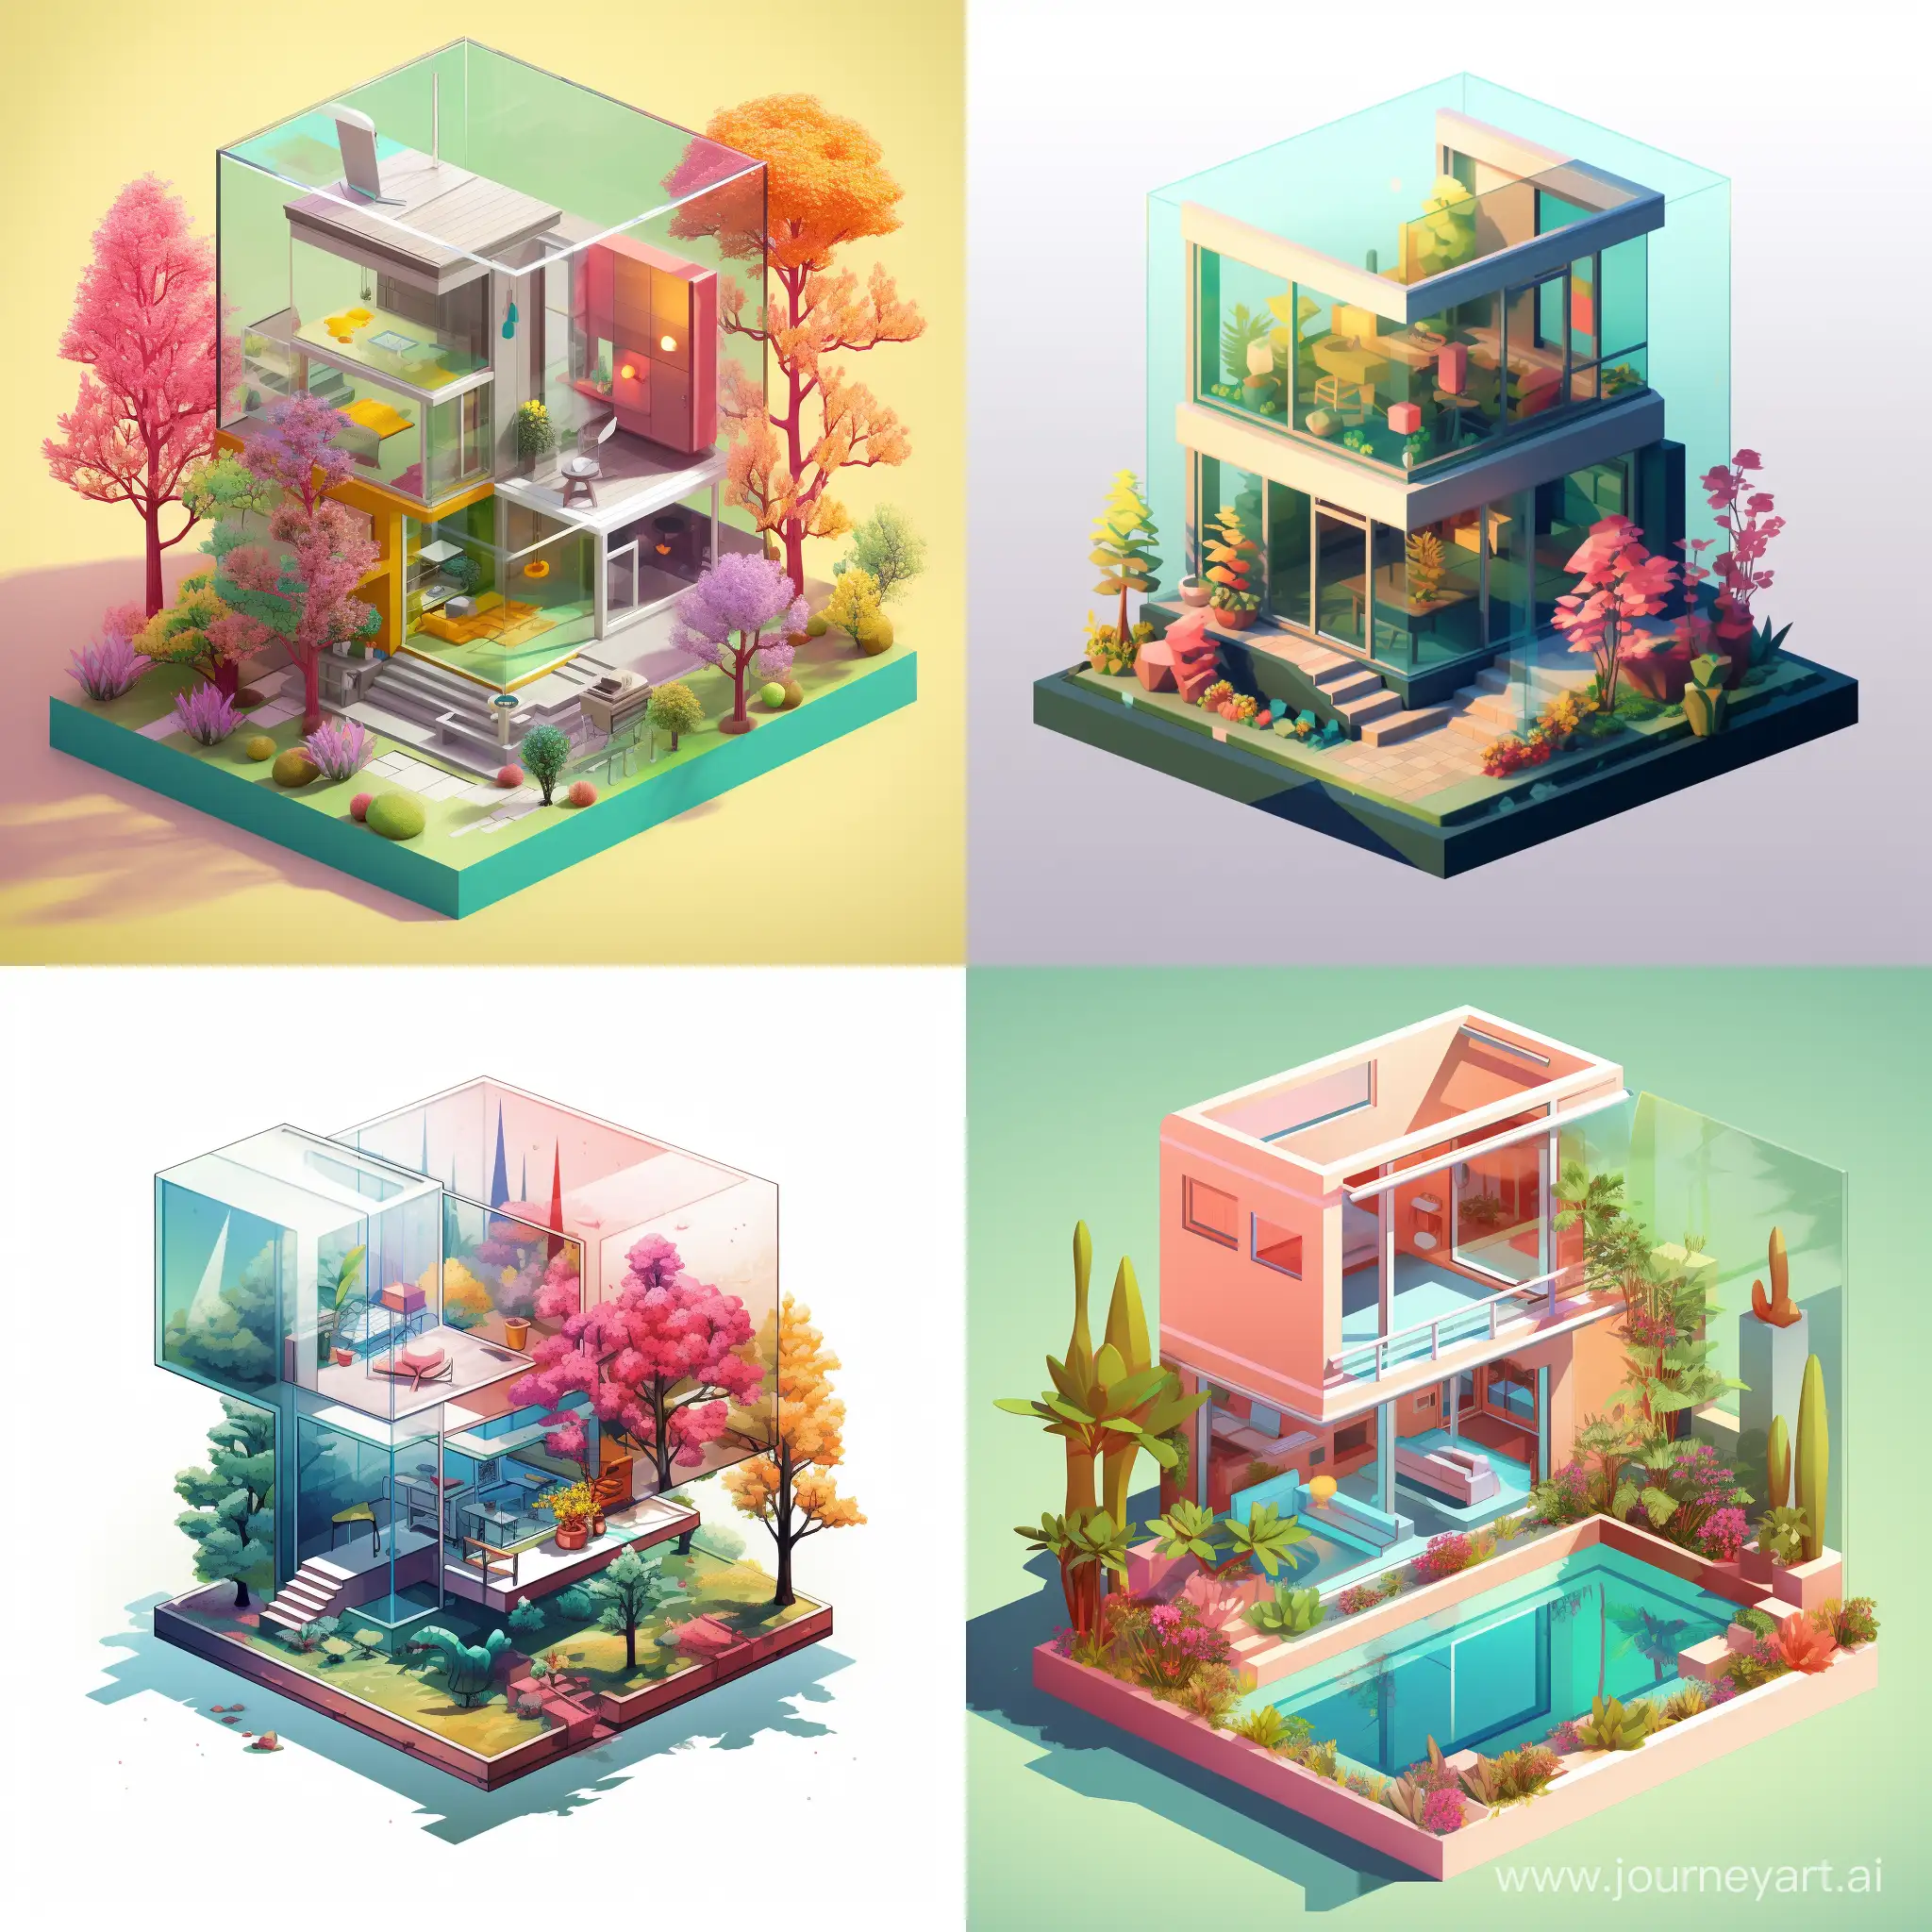 Isometric art of a house, wall made of glass, bright spring color palette, aesthetic, minimal designJesus in the Garden of Eden